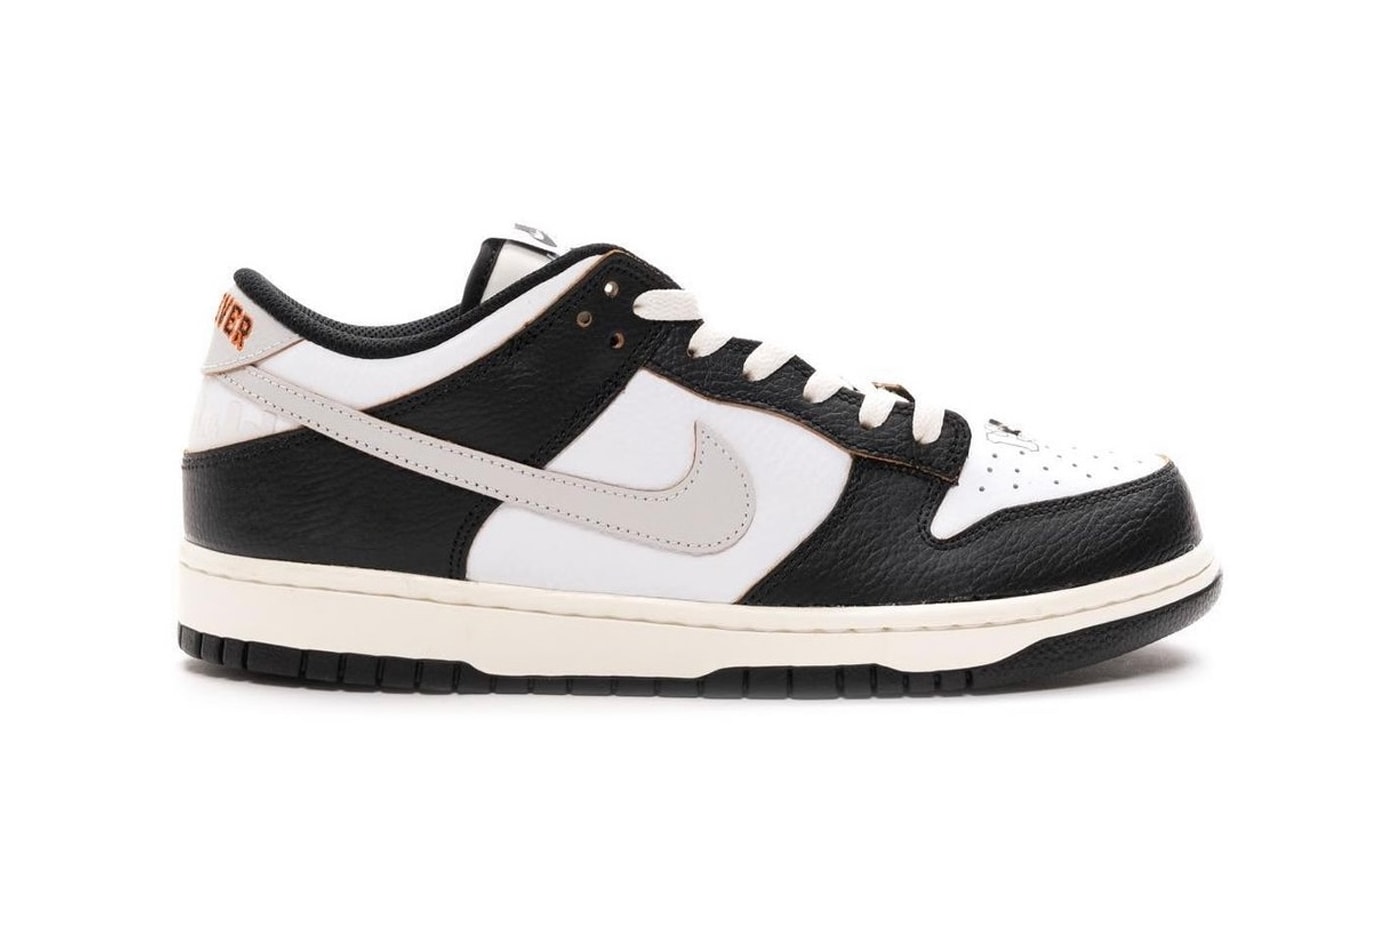 HUF Nike SB Dunk Low Collaboration Full Look Images NYC San Francisco Friends Family Release Info